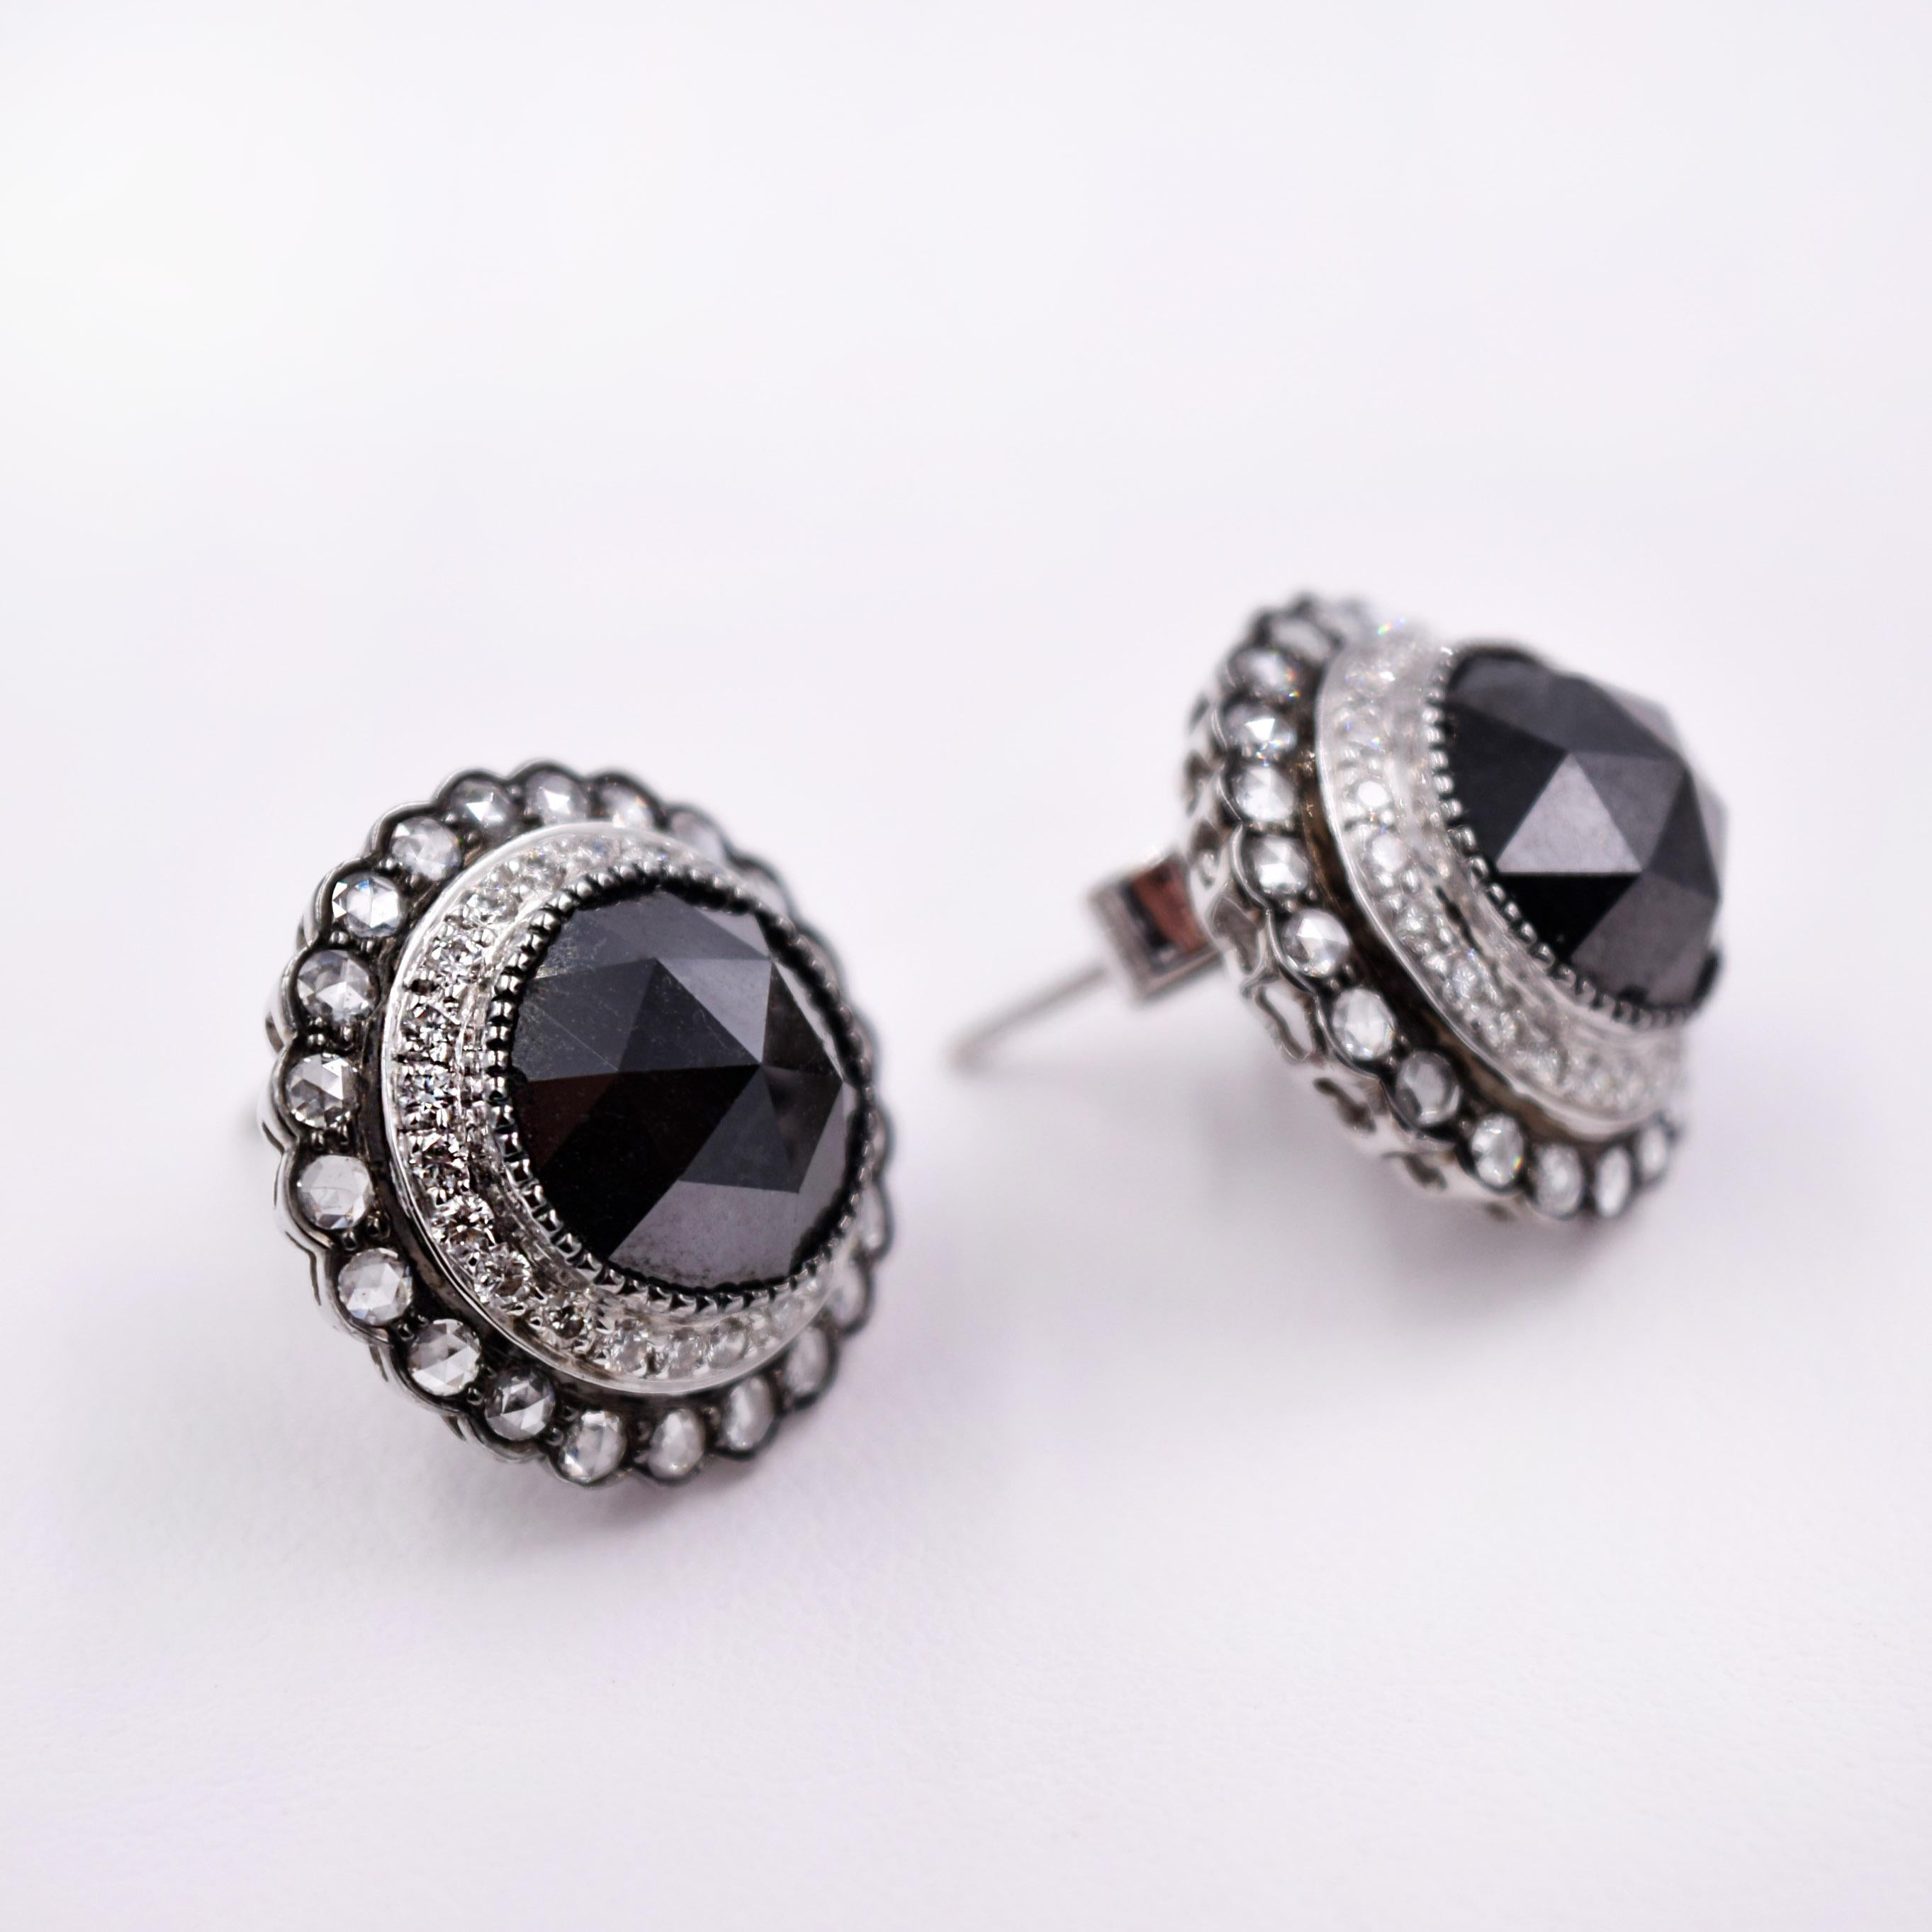 Large 10.75ct total weight rose cut Black Diamond Stud Earrings. 
Center Black Diamonds are set in a Millgrained Bezel with a double halo of full cut and rose cut White Diamonds. Beautiful in every way with a Vintage inspired look. 
Set in 18K White